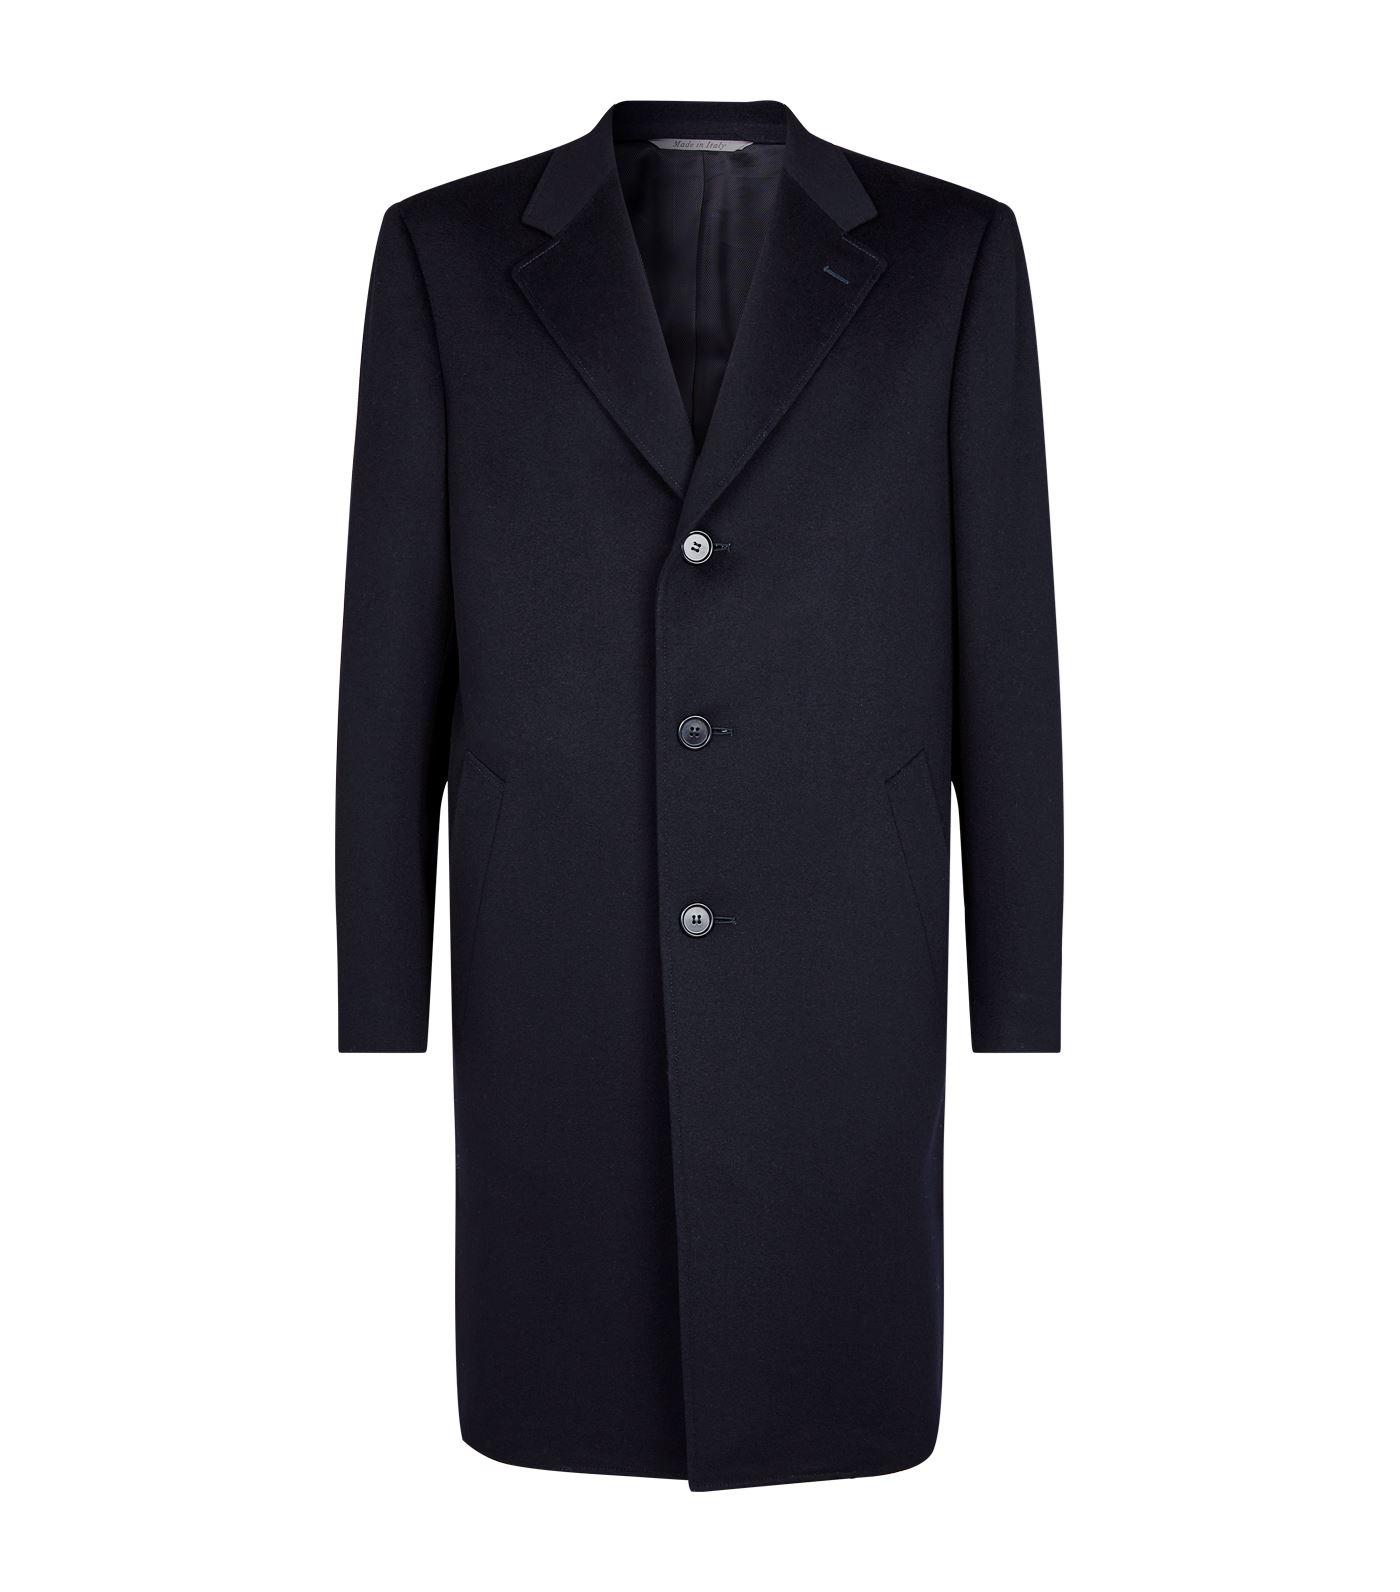 Canali Wool-cashmere Coat in Navy (Blue) for Men - Lyst